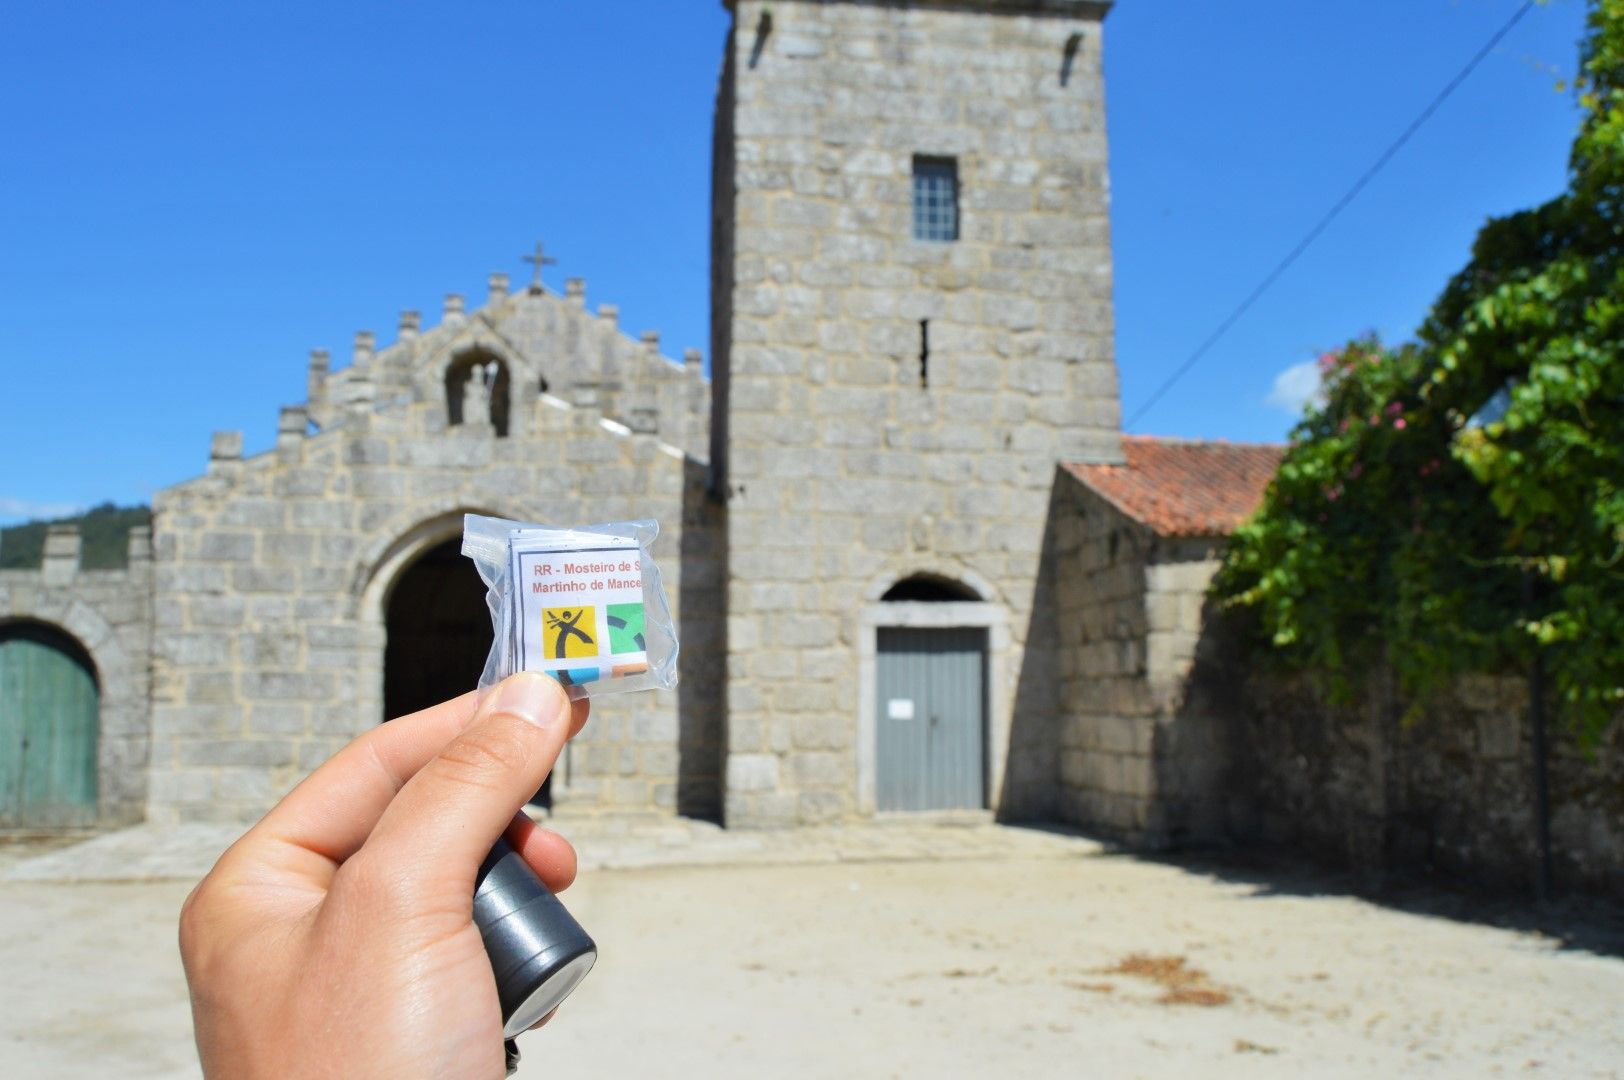 Route of the Romanesque launches a geocaching network